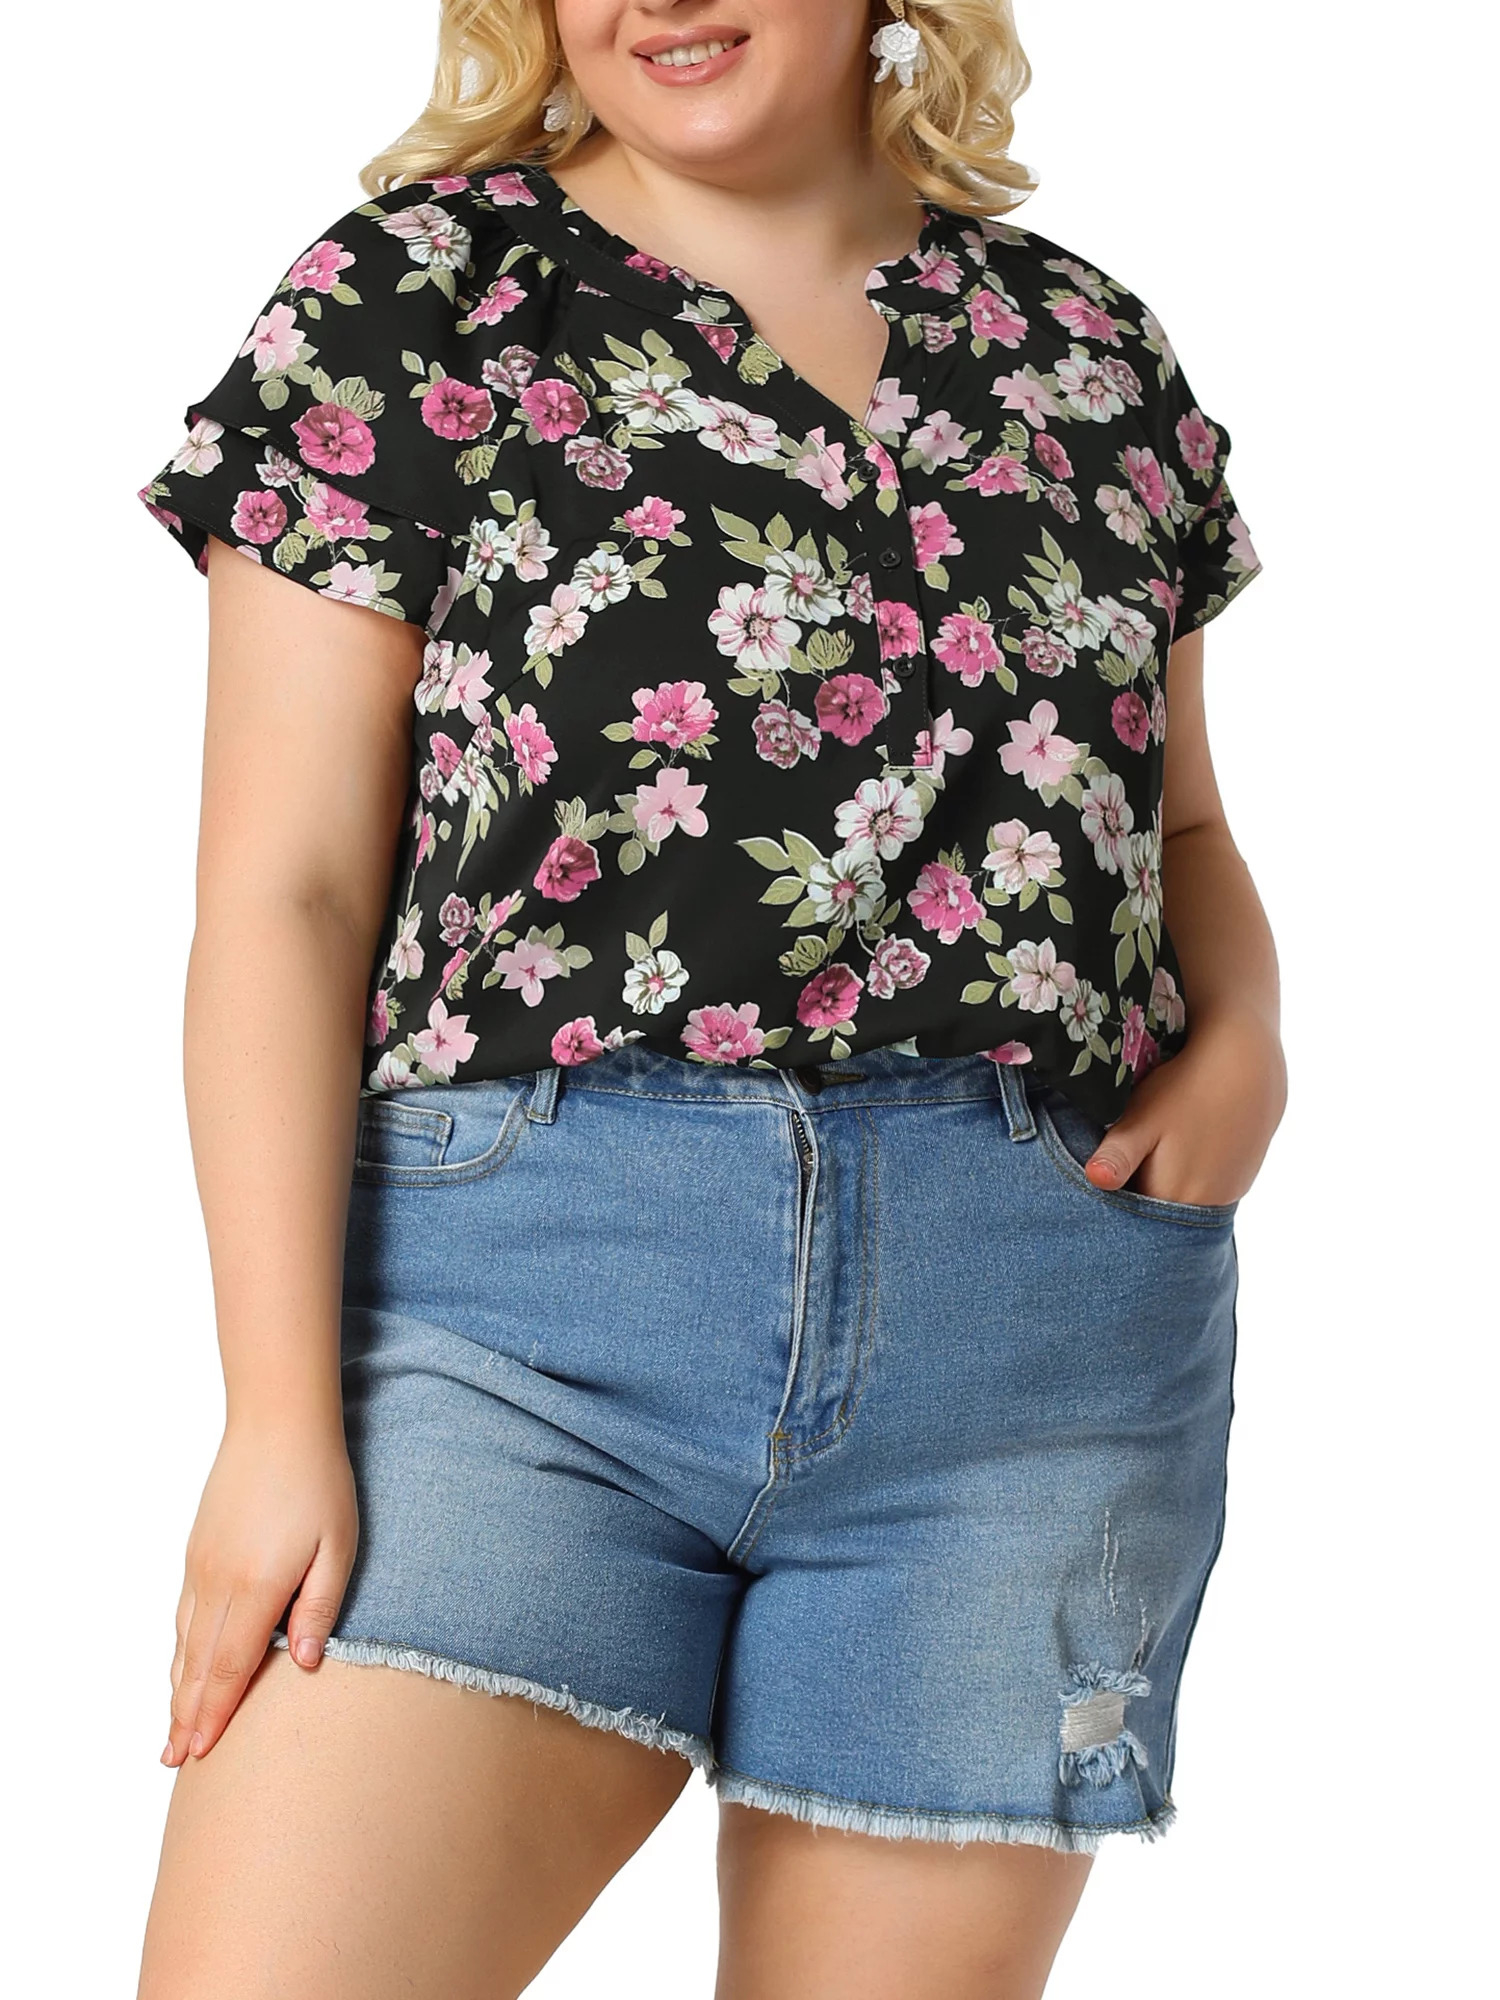 Model wearing the black floral top